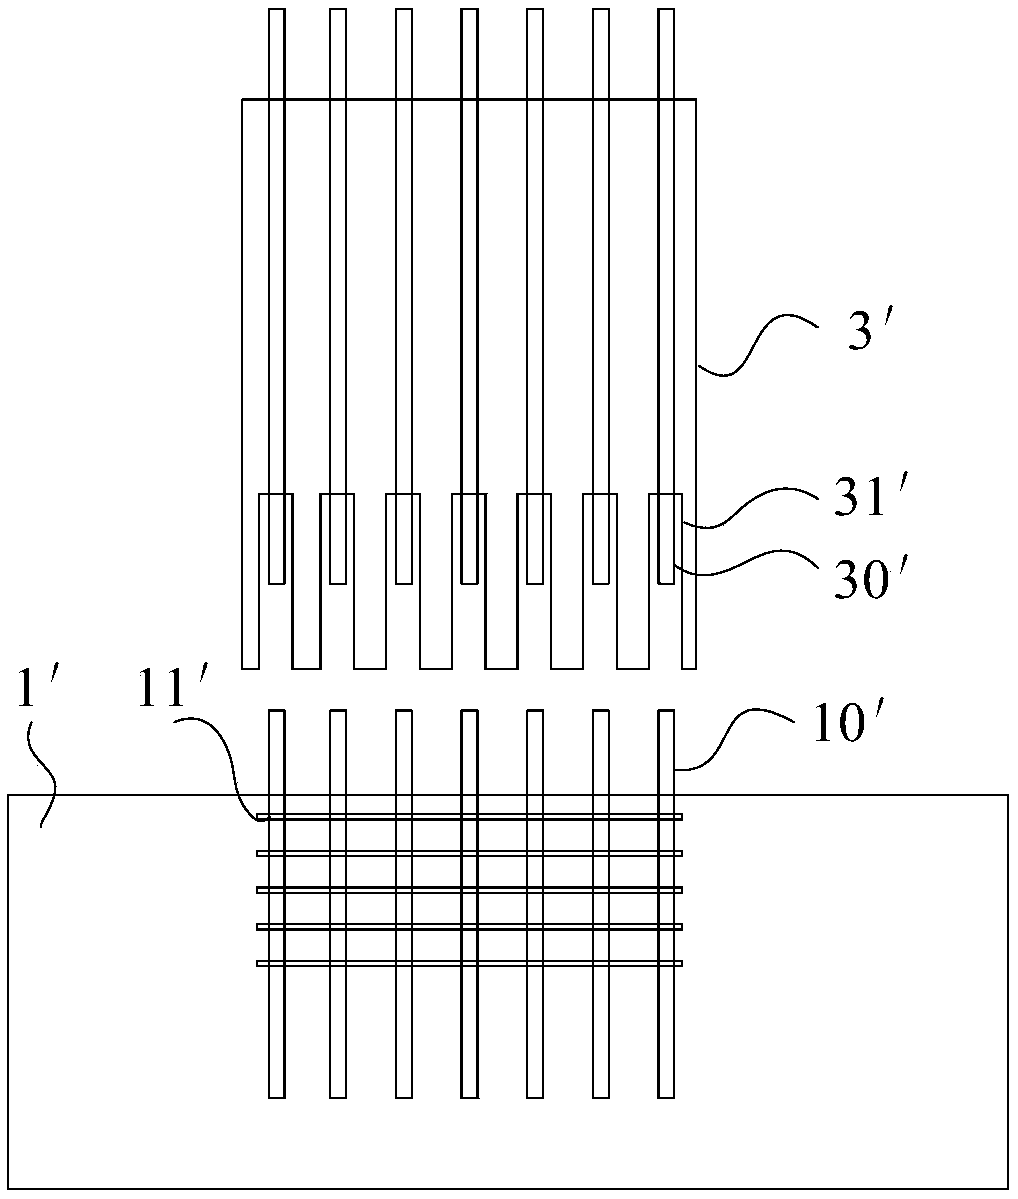 Positioning tool and positioning method for reinforcing steel bar components in bearing platform